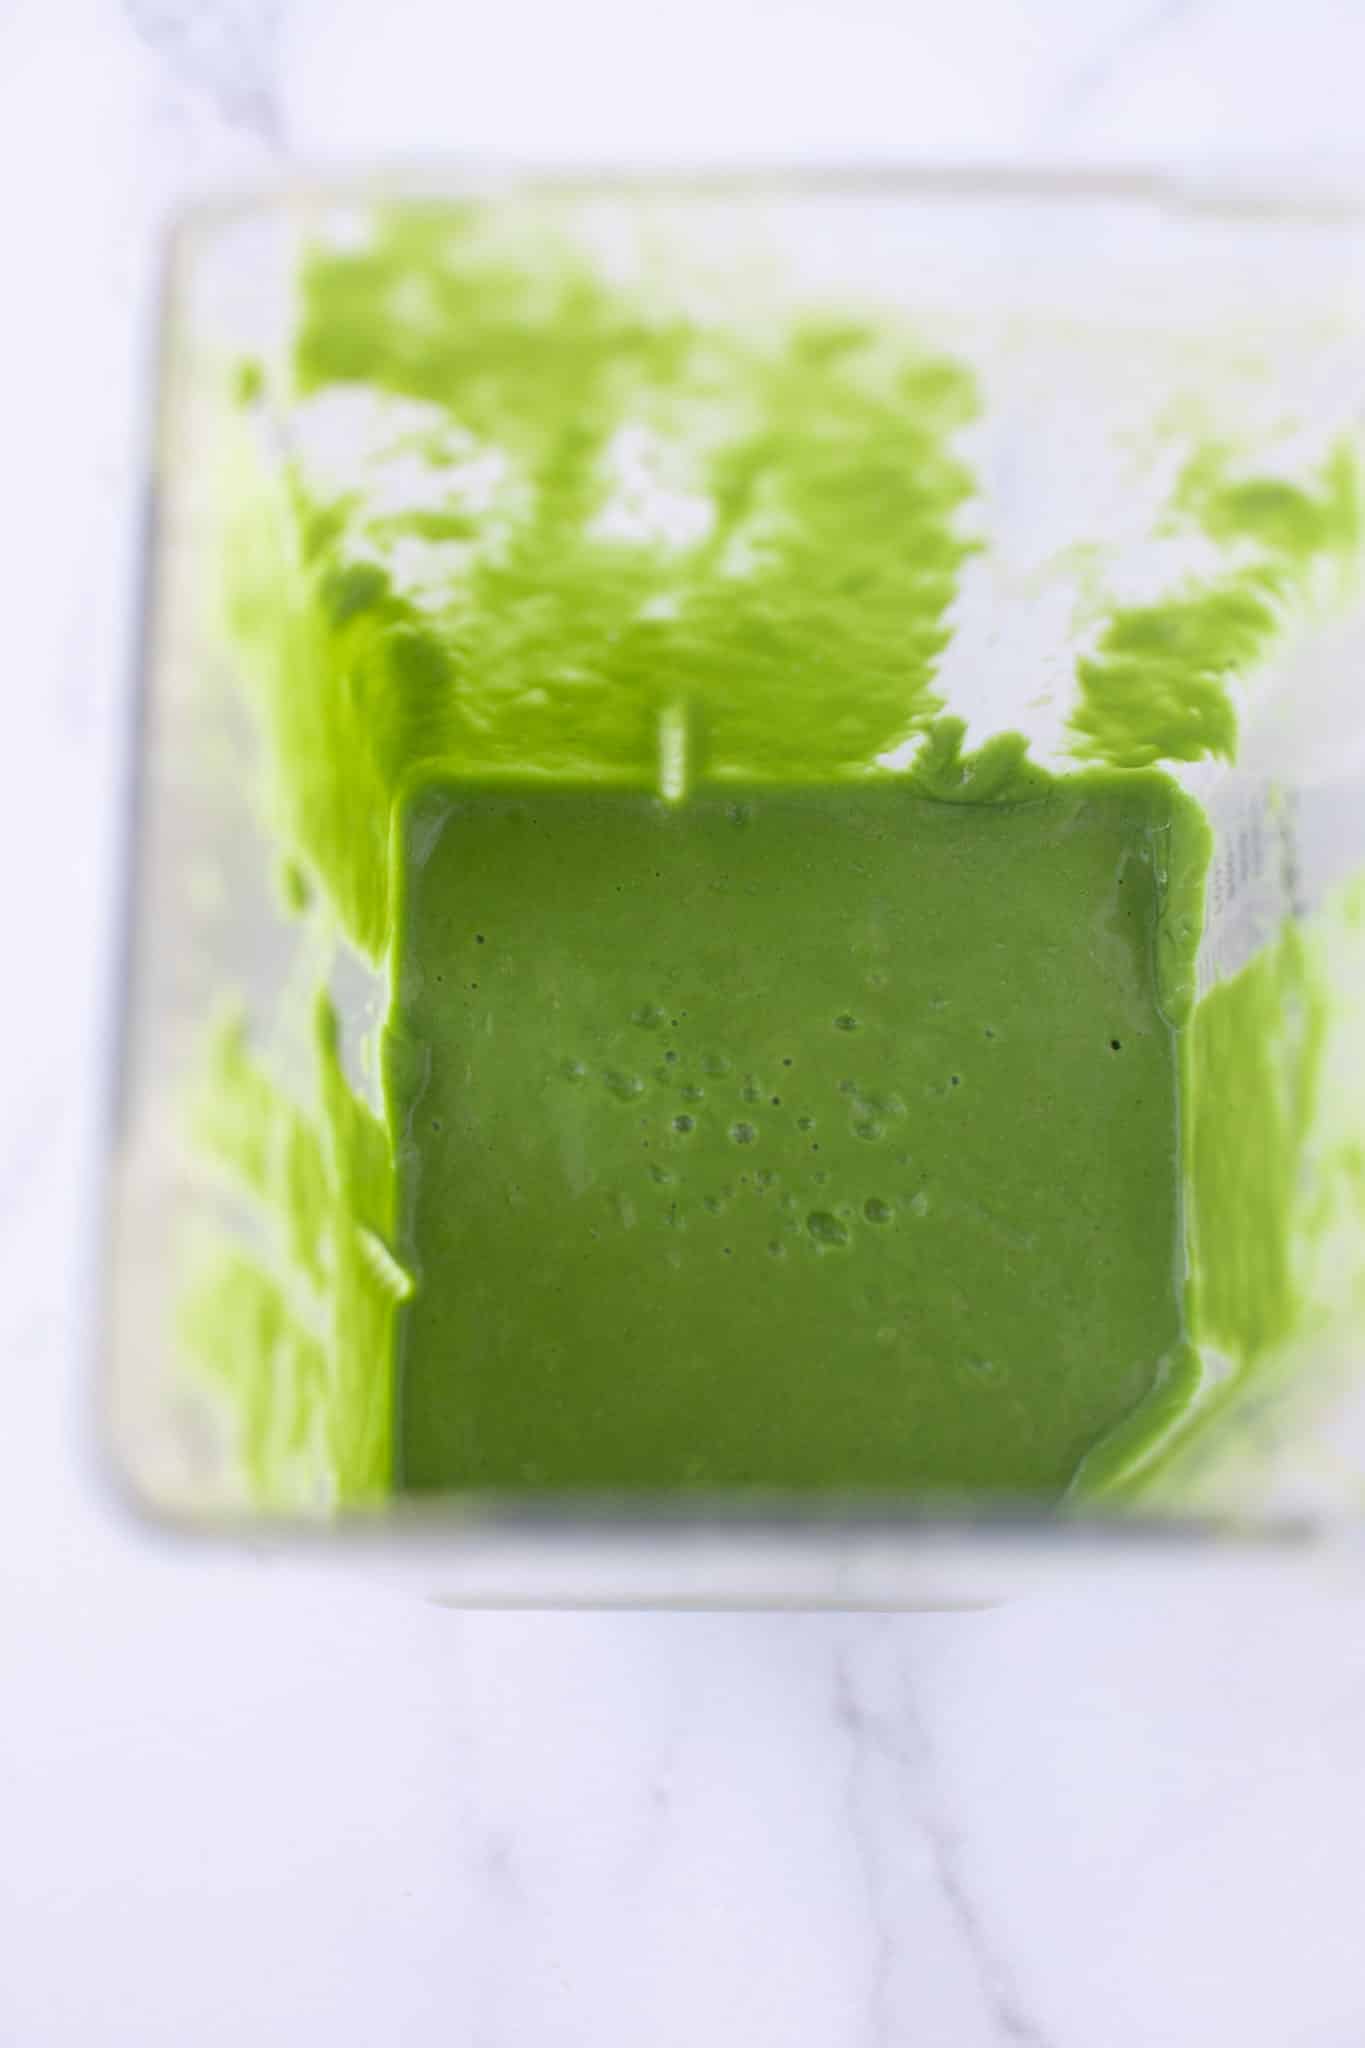 blended green smoothie ready for serving